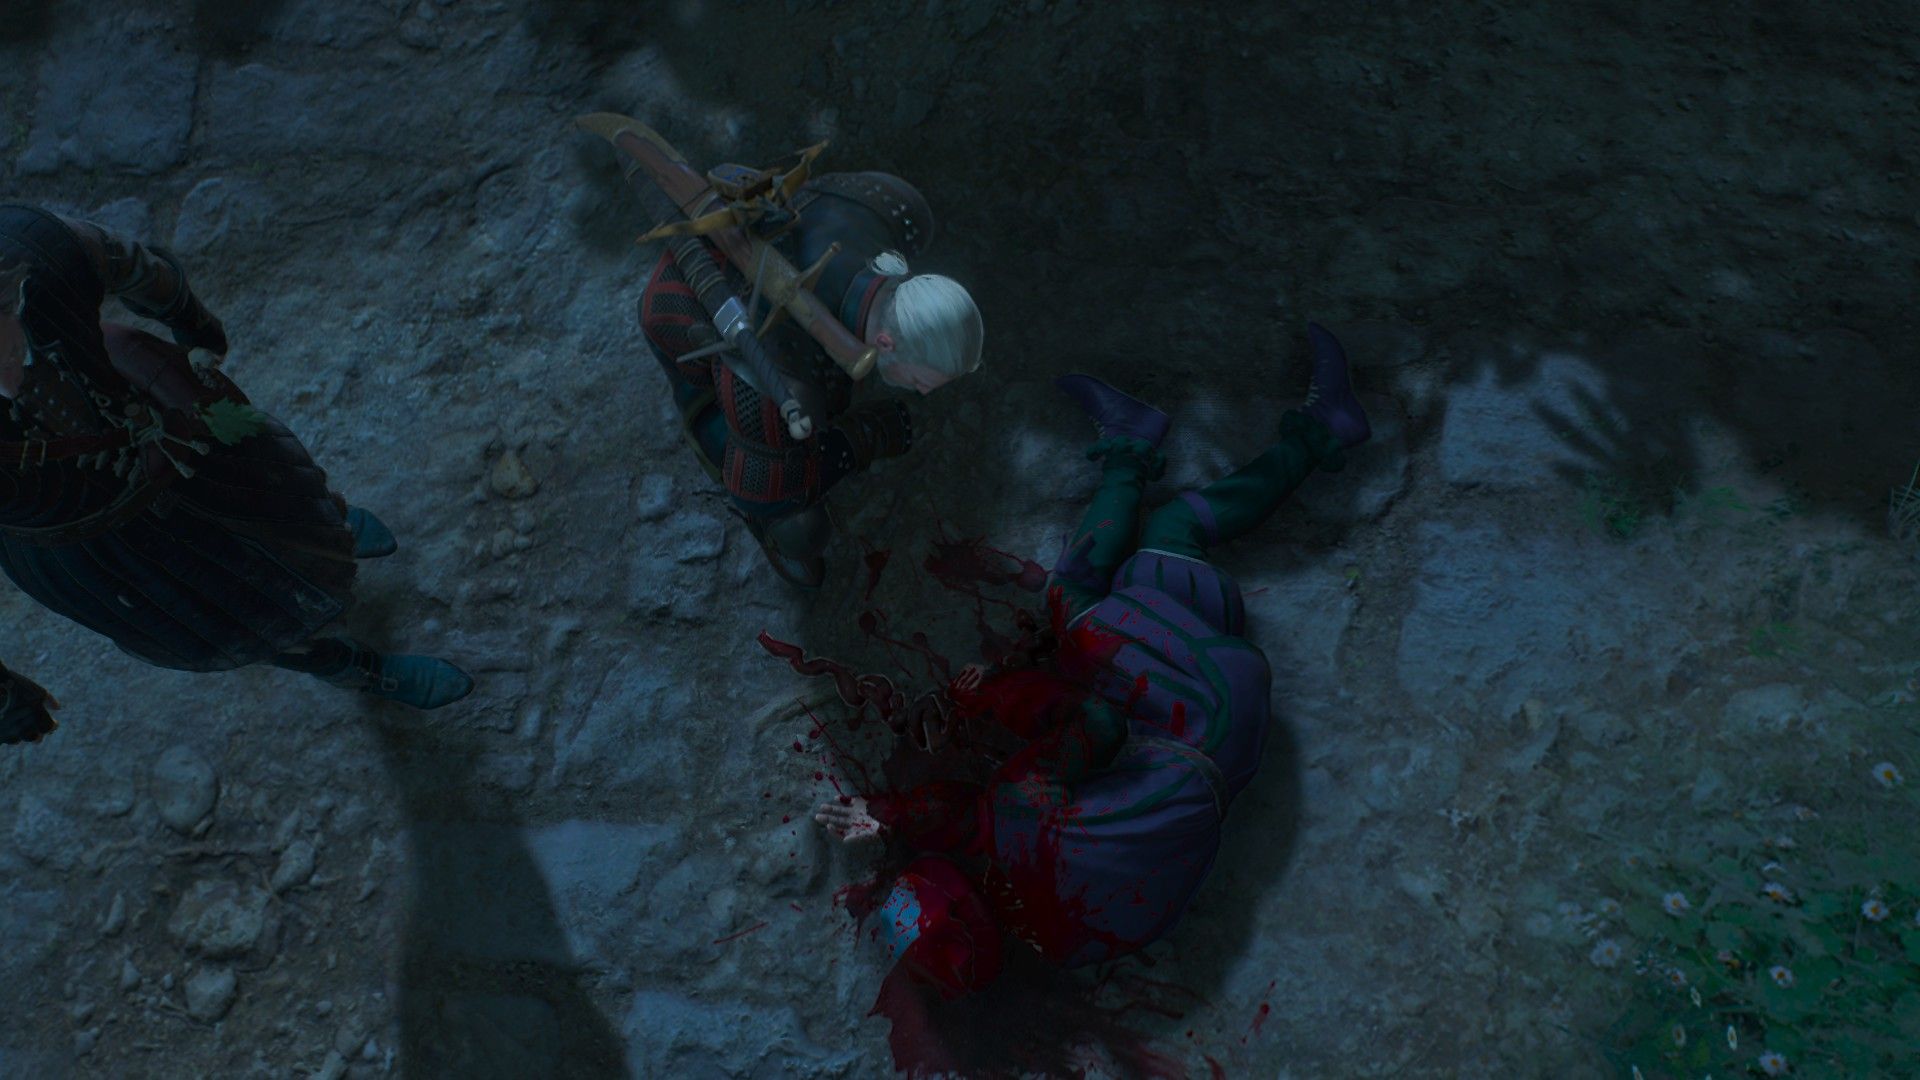 Screenshot of Geralt and Regis kneeling next to a dead body at night.